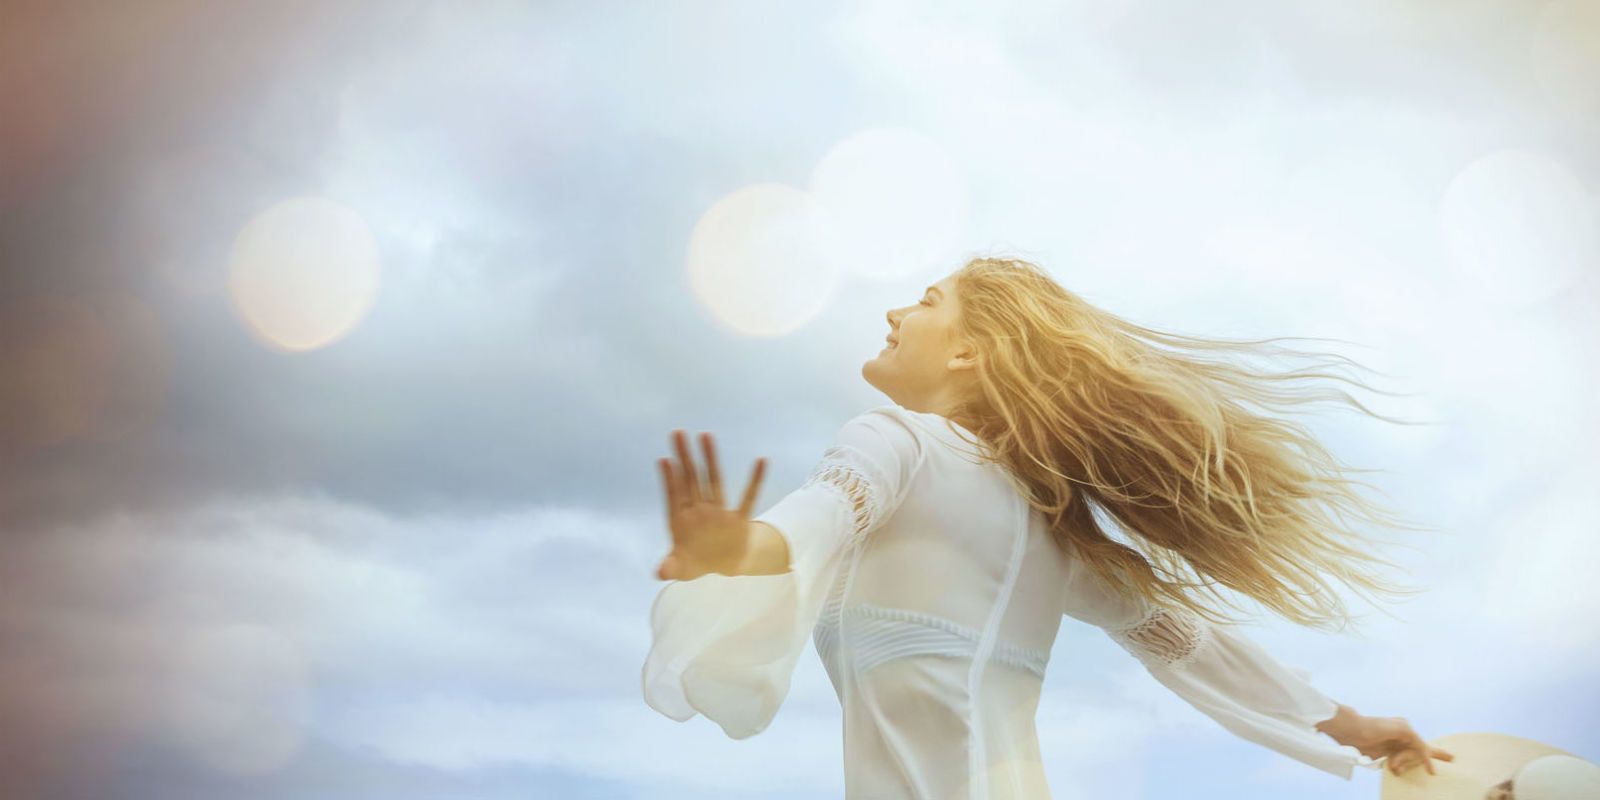 People in nature, Sky, Blond, Cloud, Sunlight, Photography, Hand, Happy, Long hair, Gesture, 